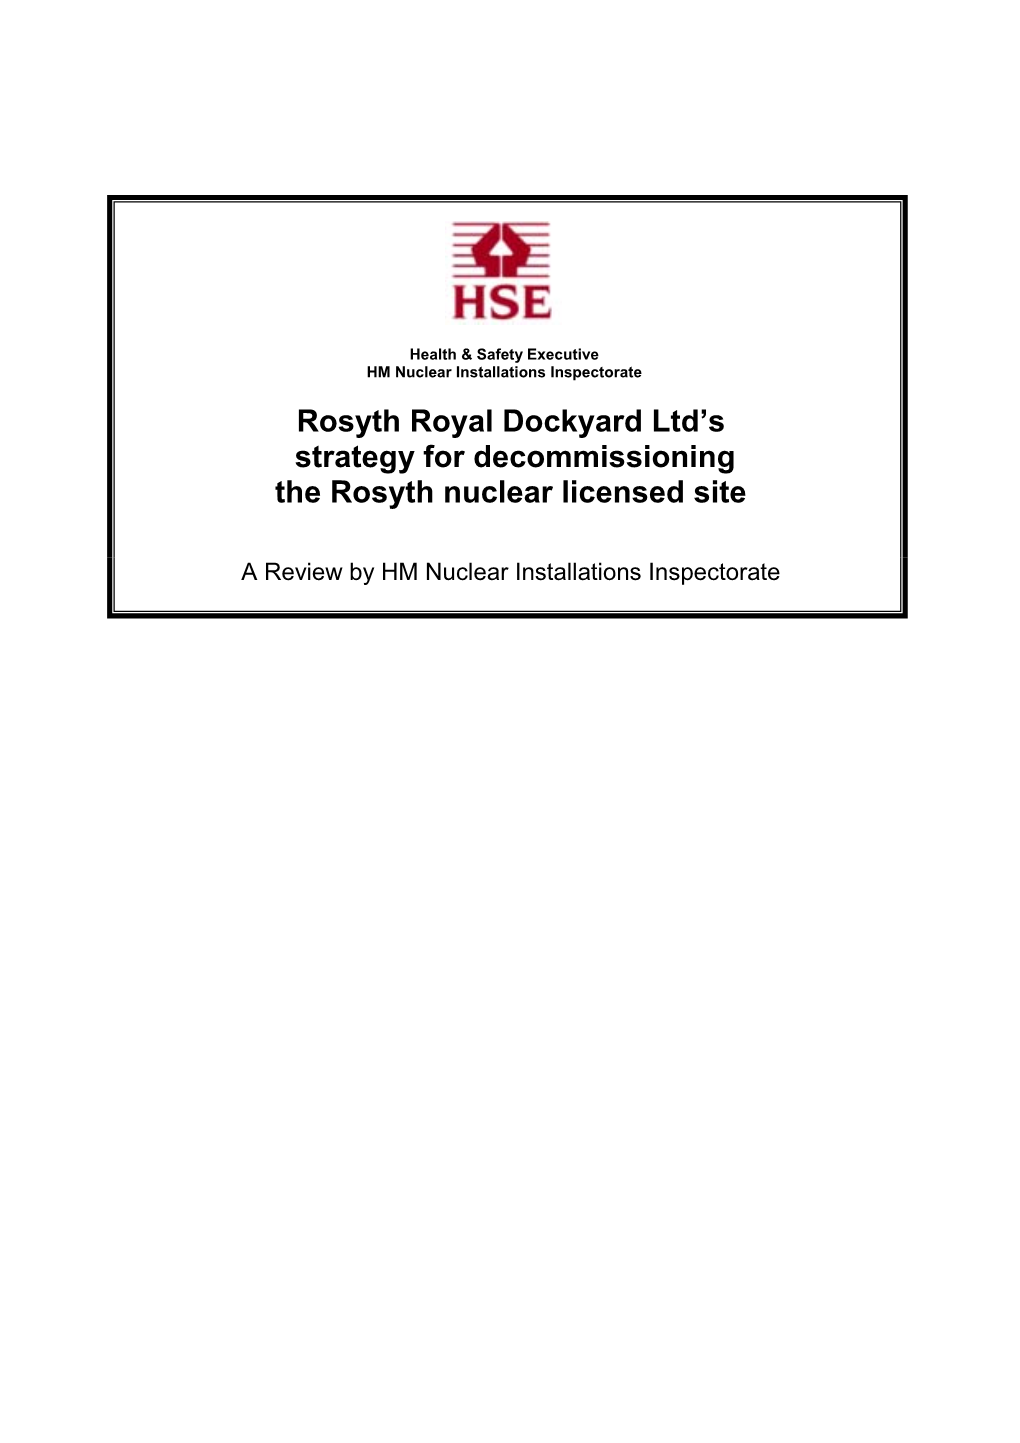 Rosyth Royal Dockyard Ltd's Strategy for Decommissioning the Rosyth